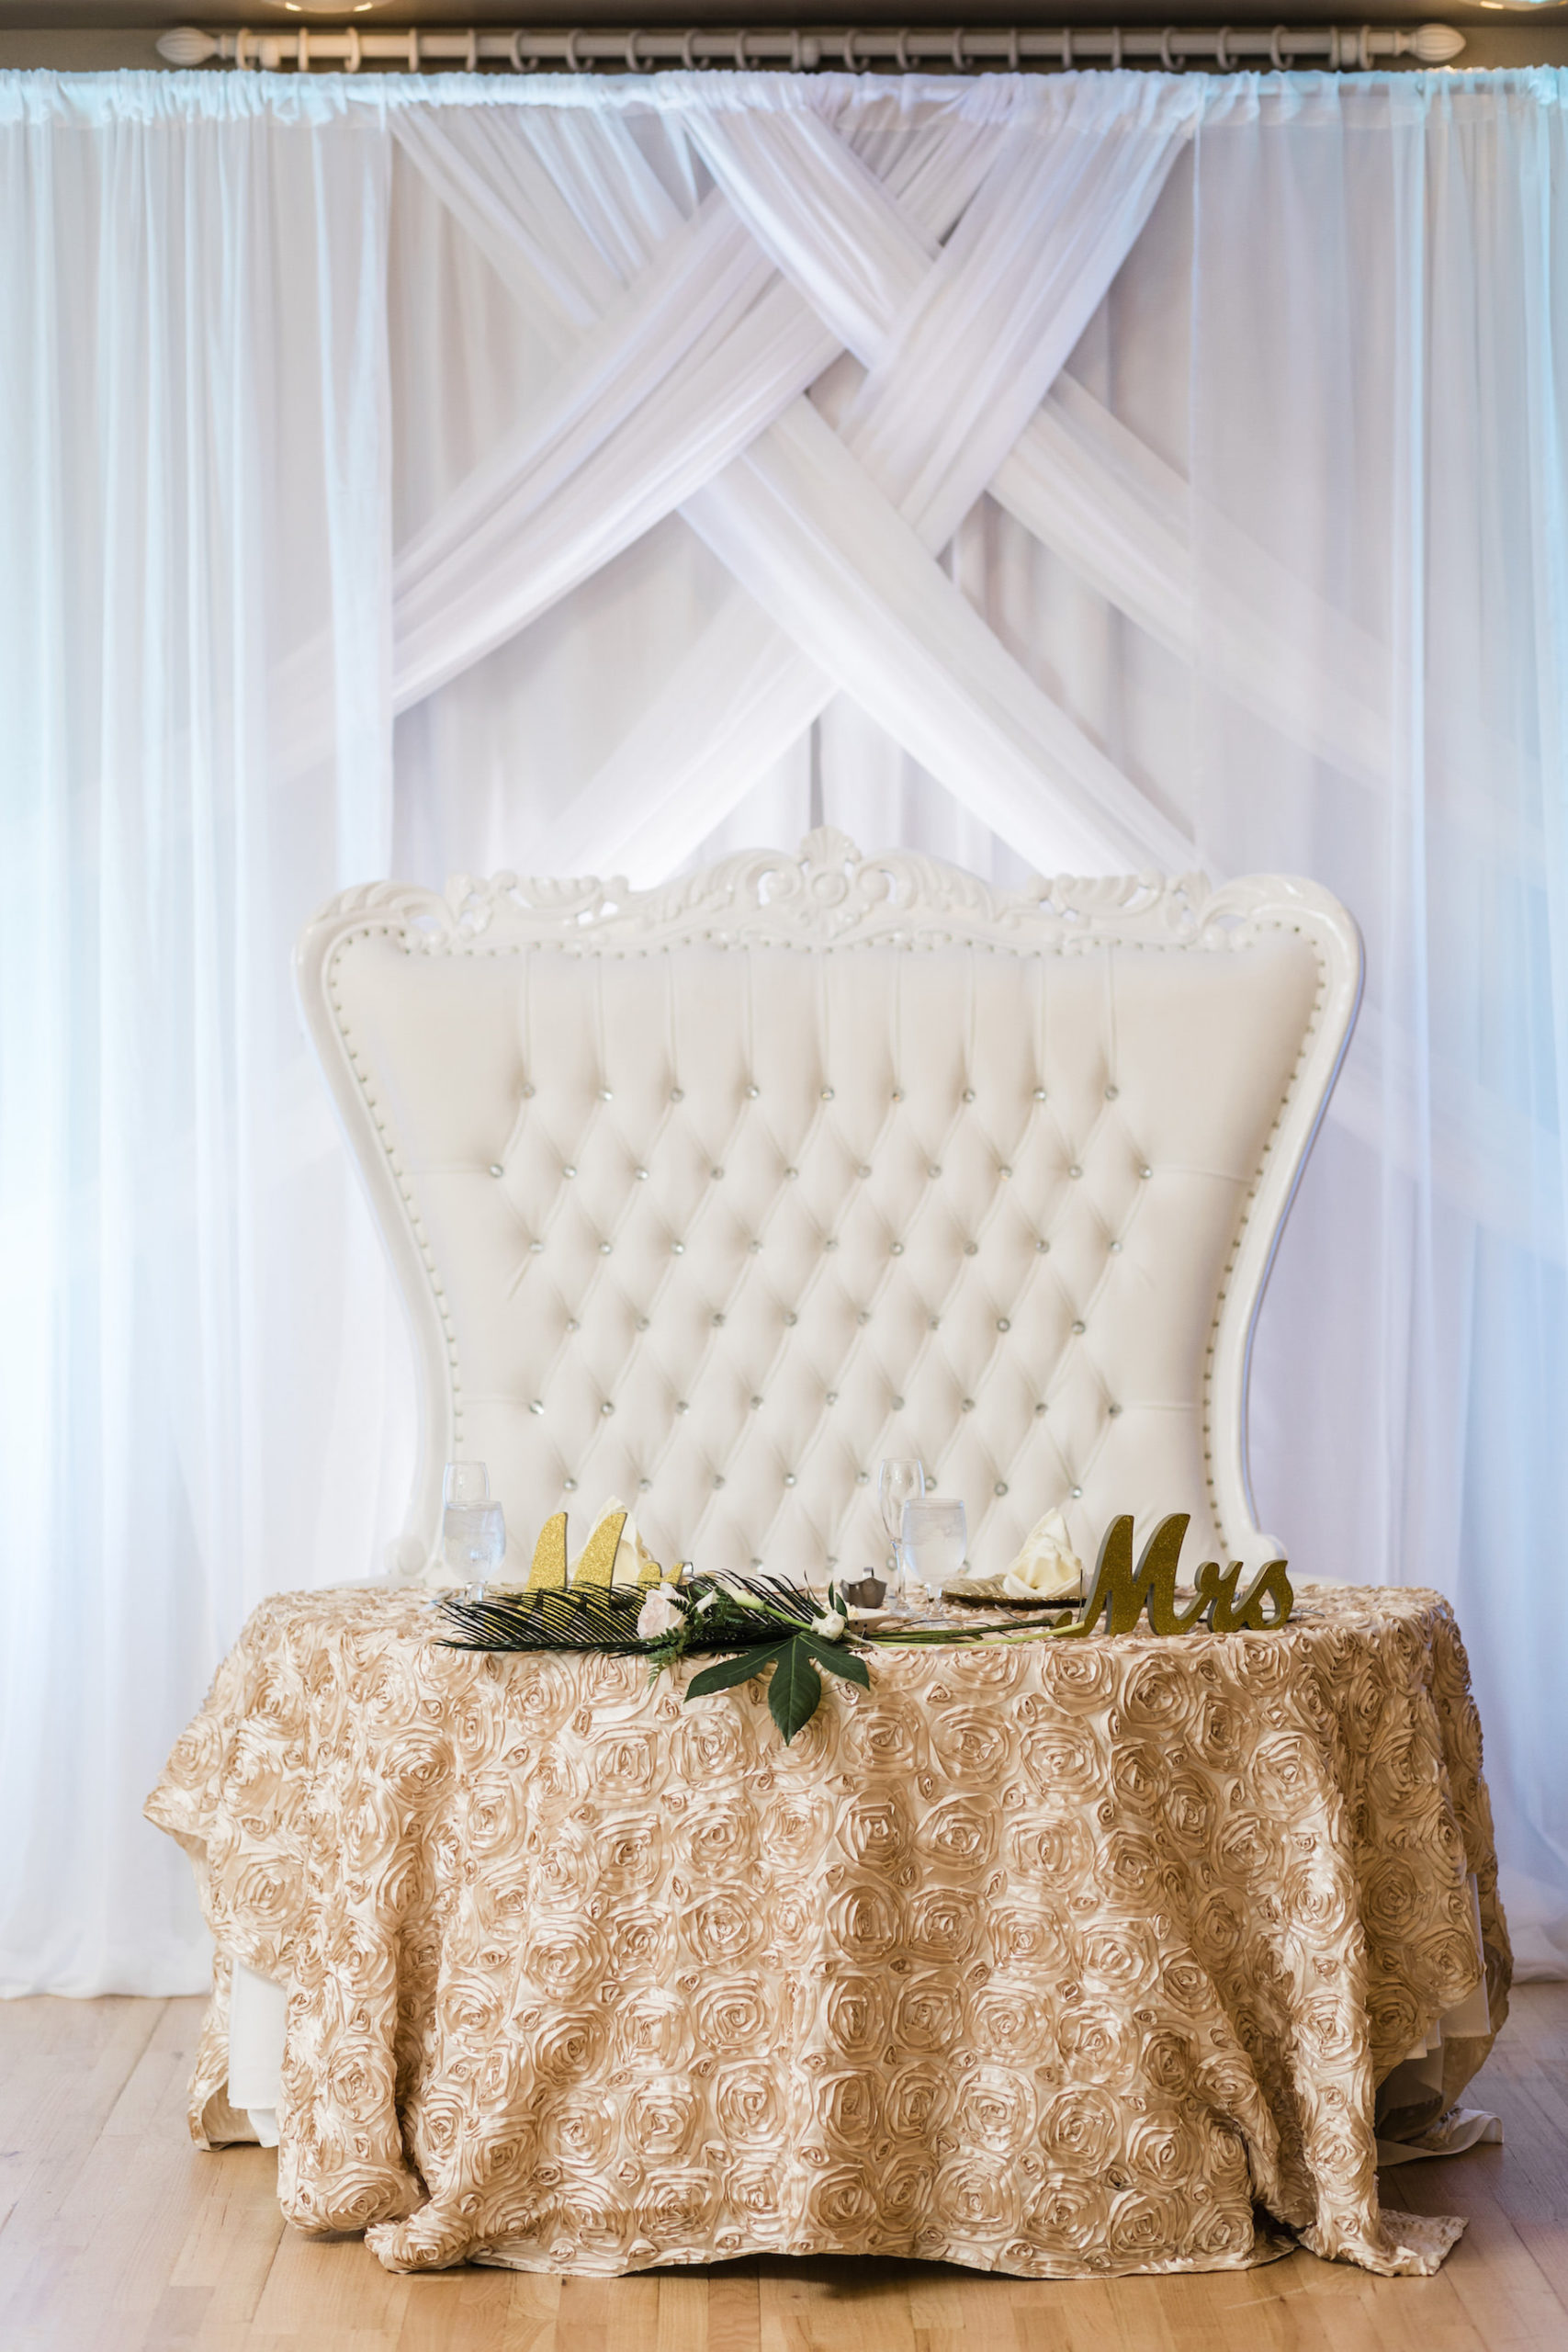 Wedding Sweetheart Table with Ornate Vintage Tufted Love Seat and Champagne Embroidered Textured Rosette Table Linen | White Pipe and Drape Backdrop with Uplighting | Mr and Mrs Sweetheart Table Sign